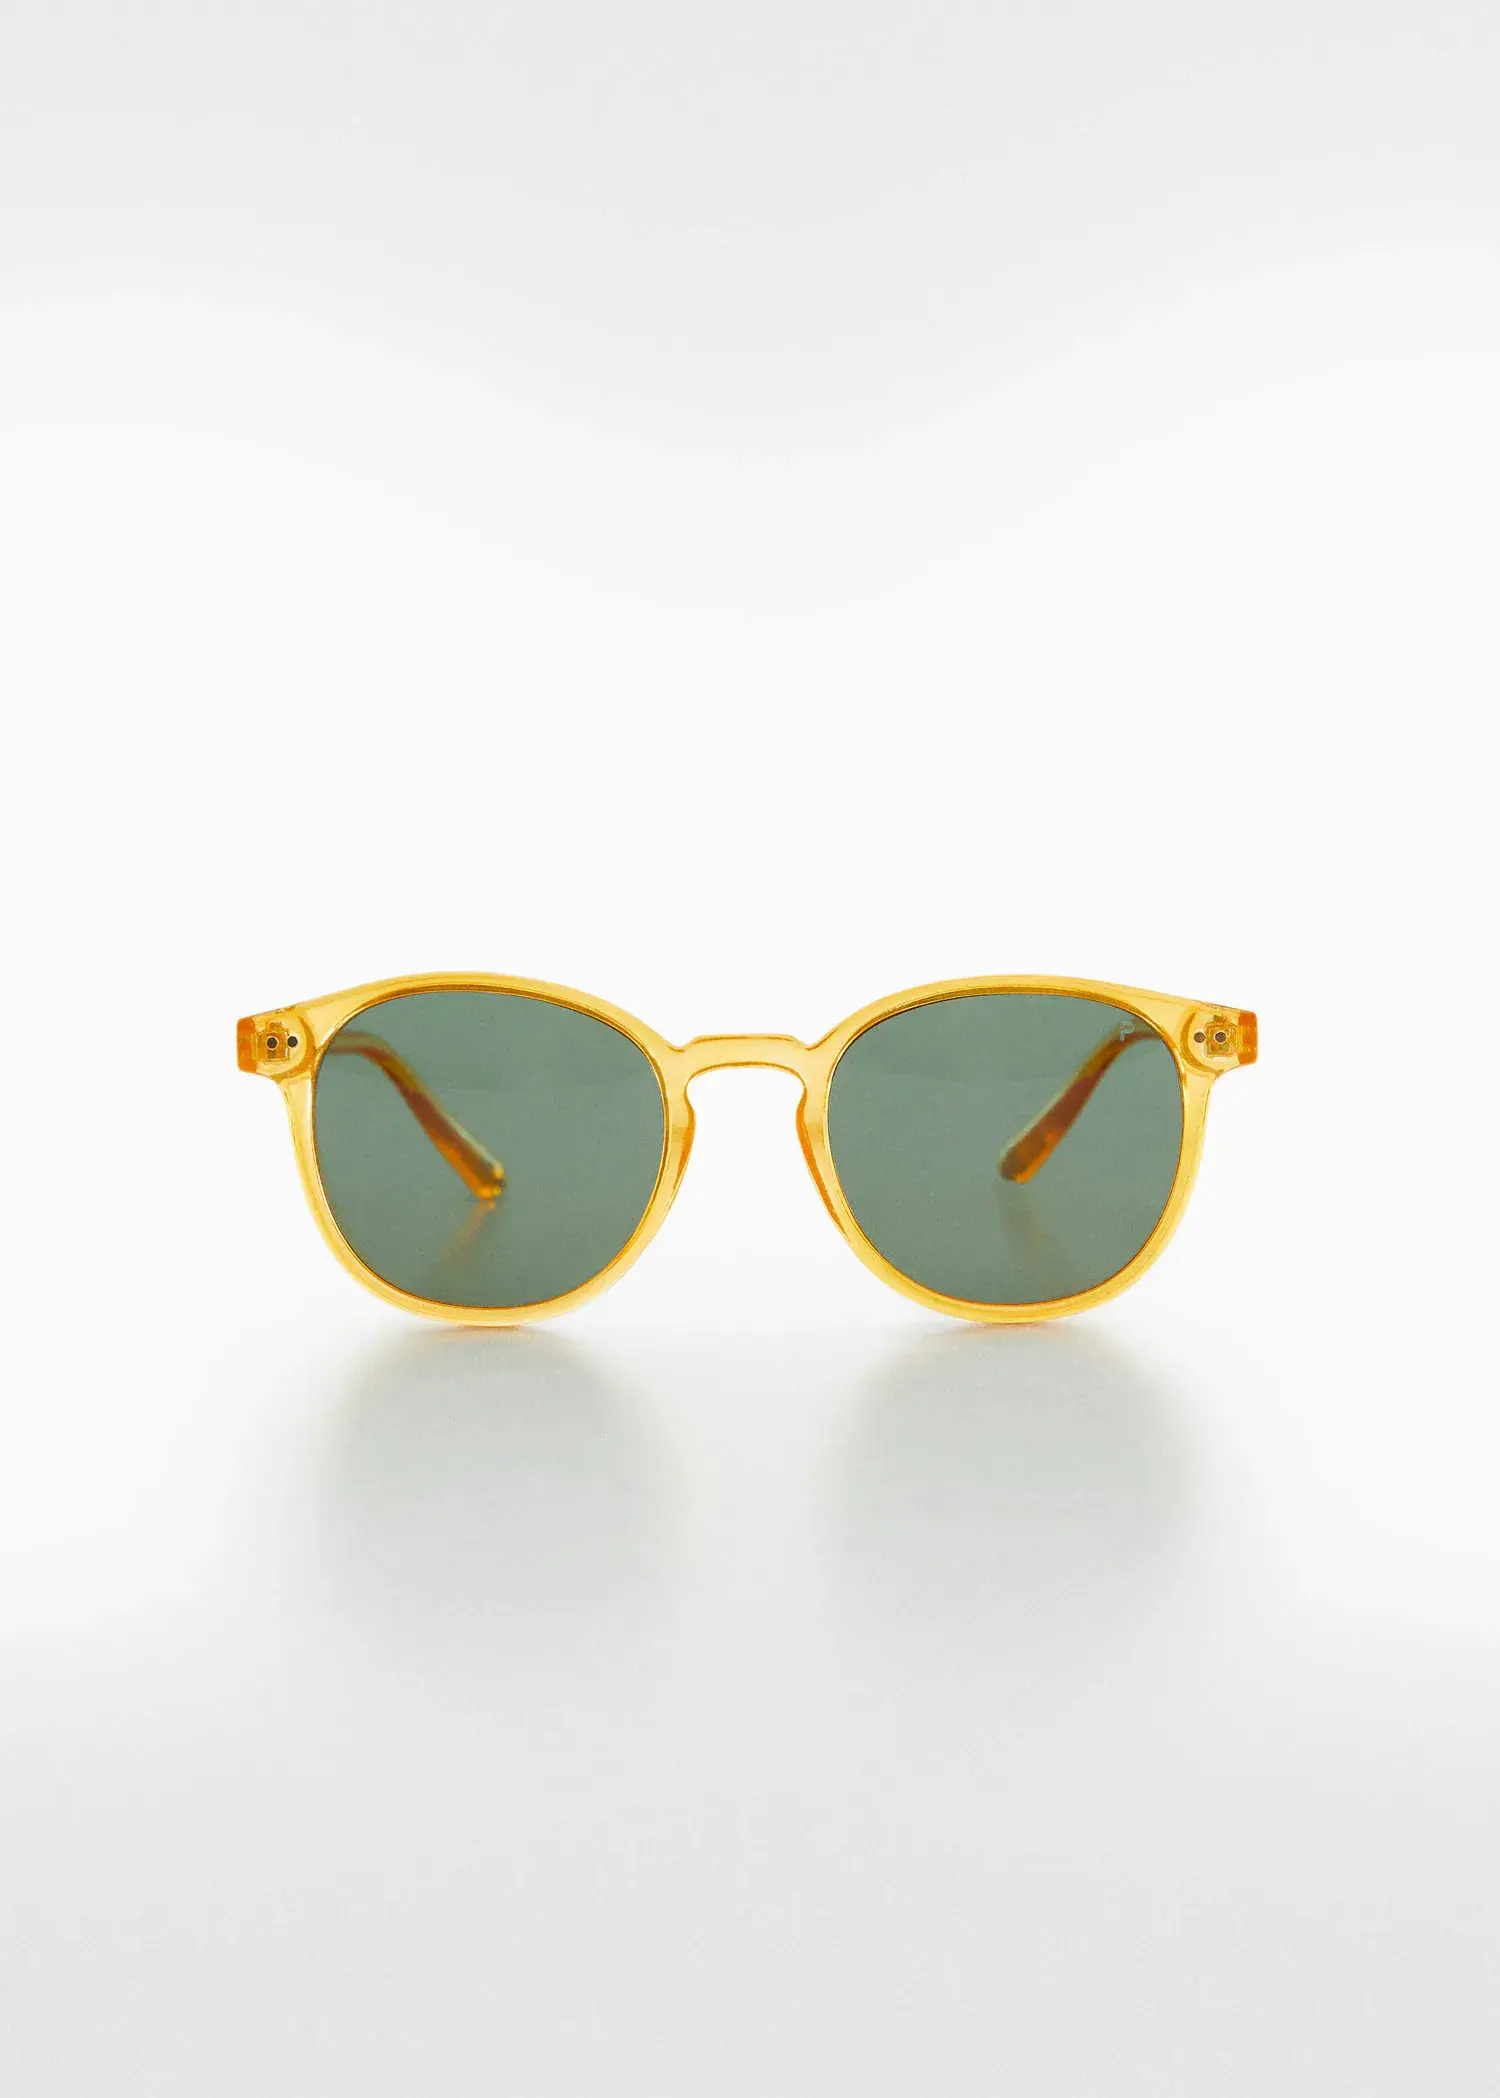 Mango Polarised sunglasses. a pair of sunglasses with green tinted lenses. 